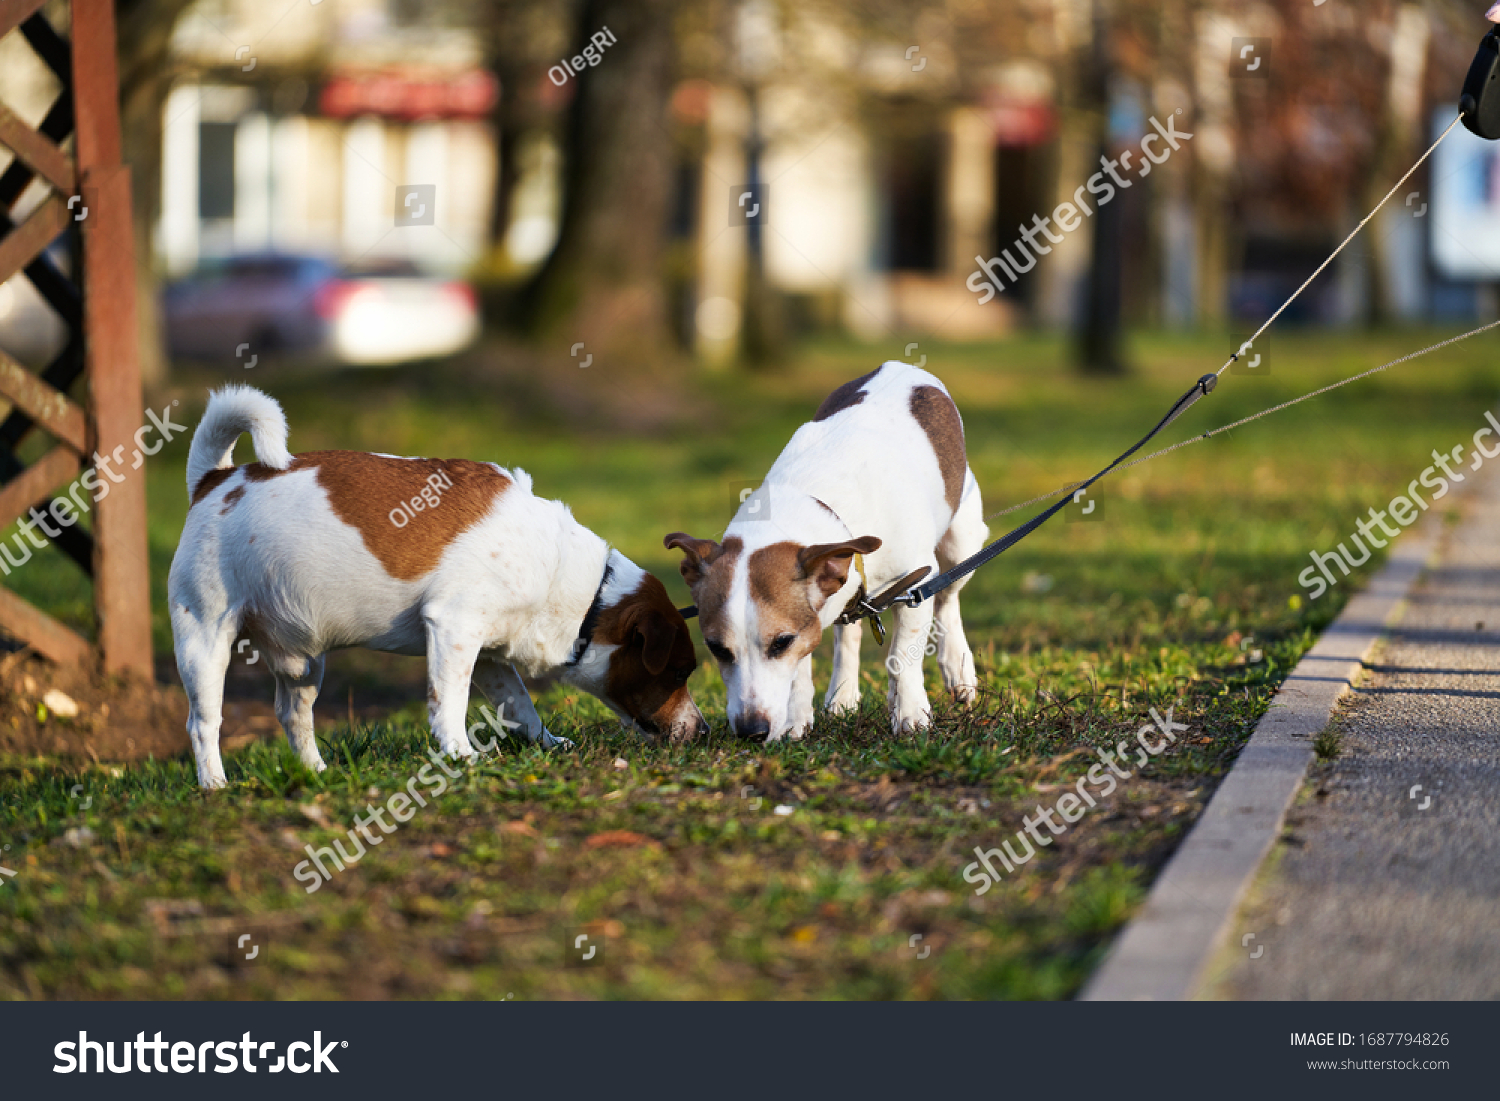 Two Jack Russell terriers walking along the grass. #1687794826